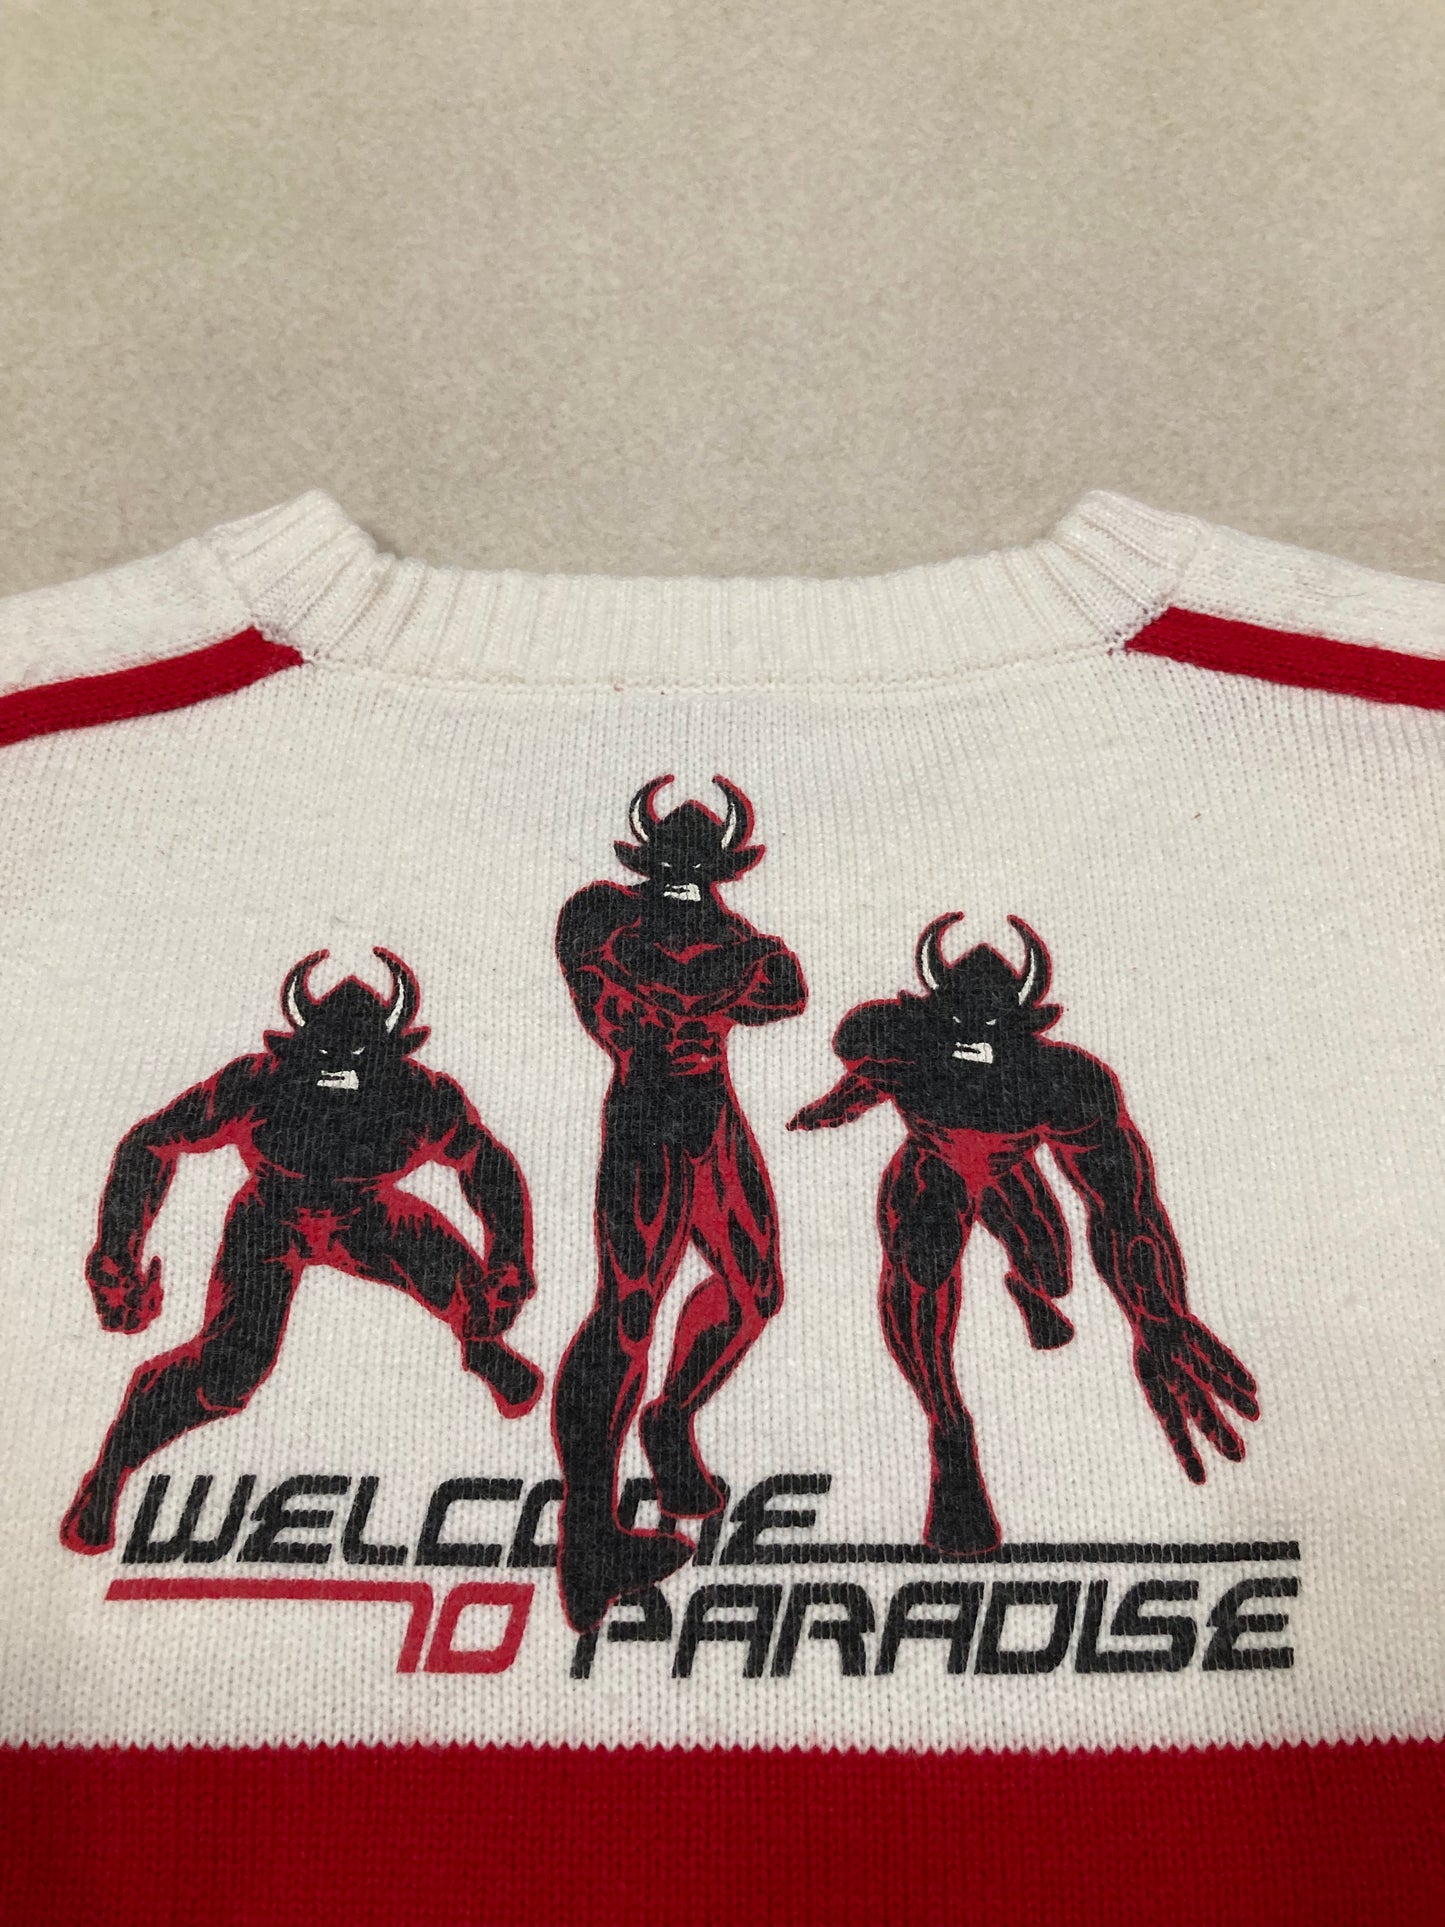 Jersey WP2 ‘Welcome To Paradise’ Hip Hop 00s Vintage - M